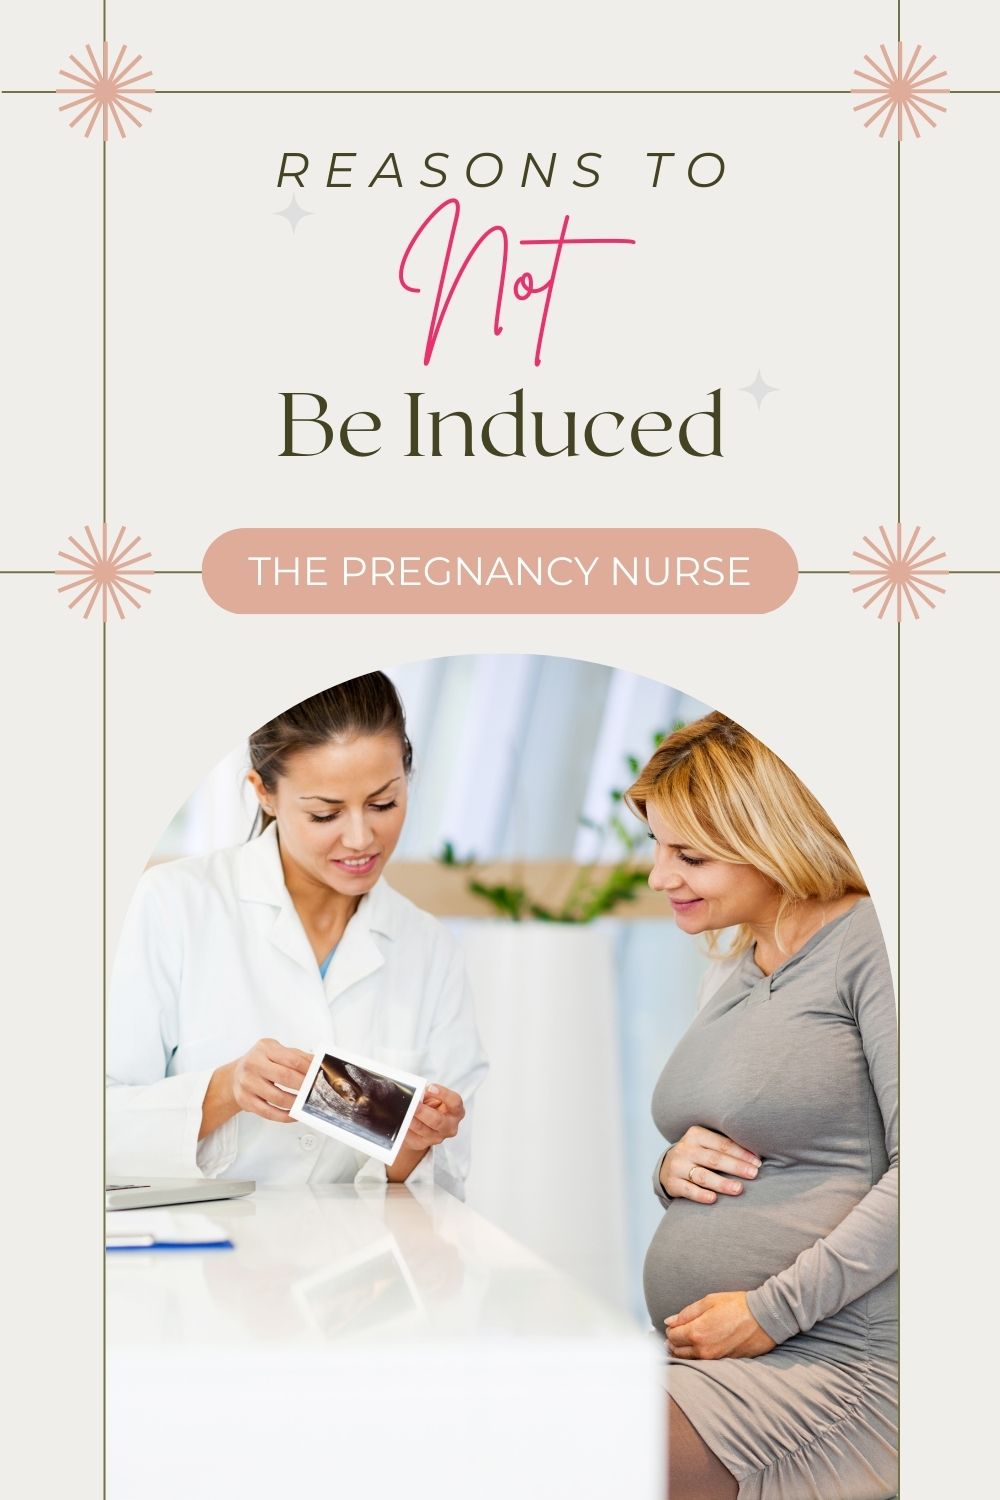 Induction may seem like the perfect control measure, but is it really? Discover how it could mean giving up your comforts, inviting higher risks, and more! Let's unravel the myths of induction together.